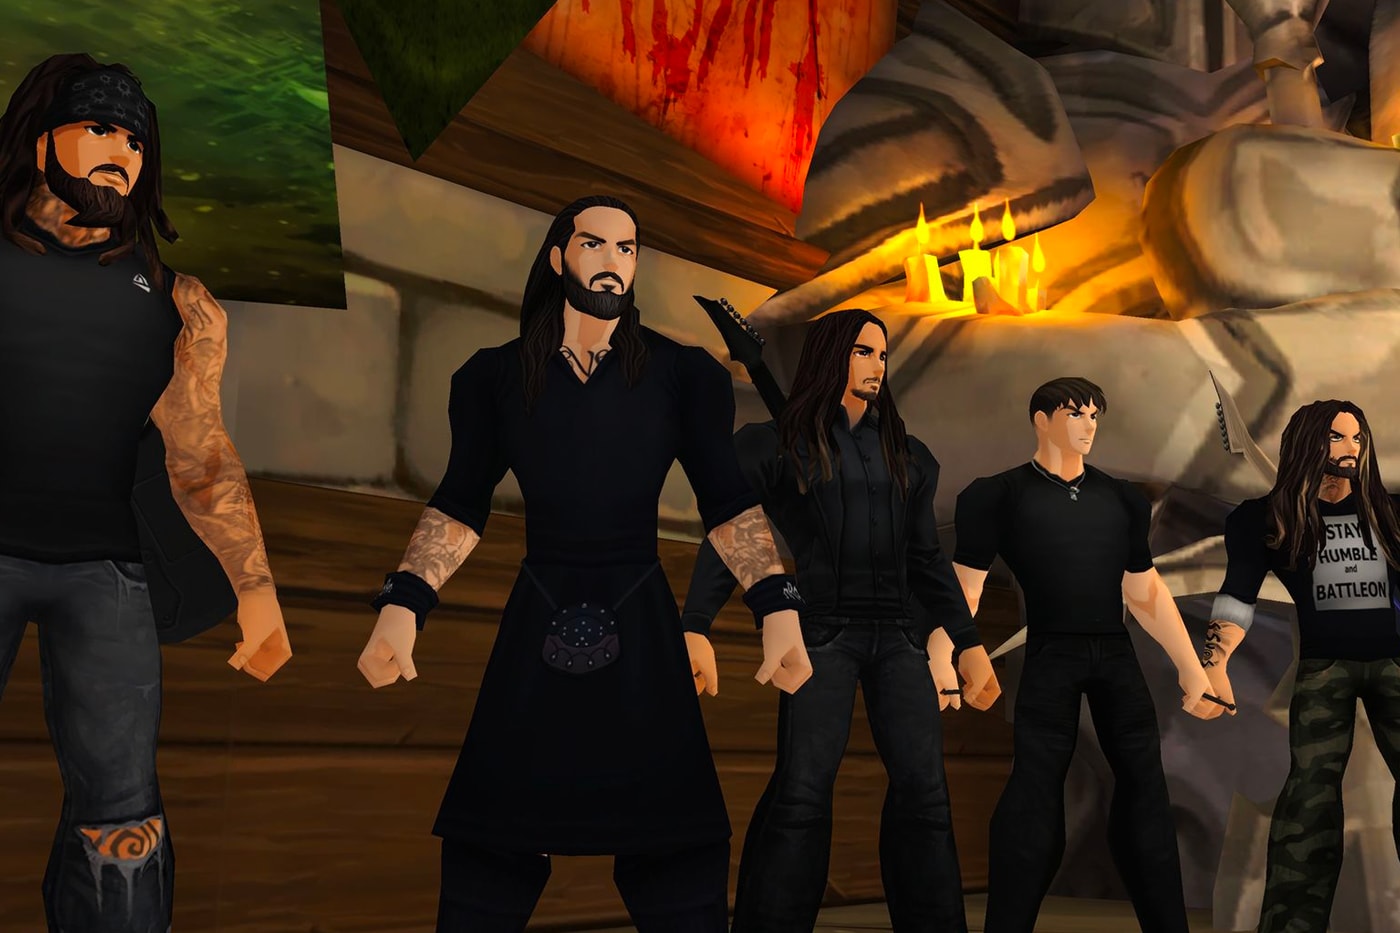 Korn to Play Virtual Concerts in Video Games adventurequest 3d aq worlds music rock & roll mosh pit artix 'The Nothing' 